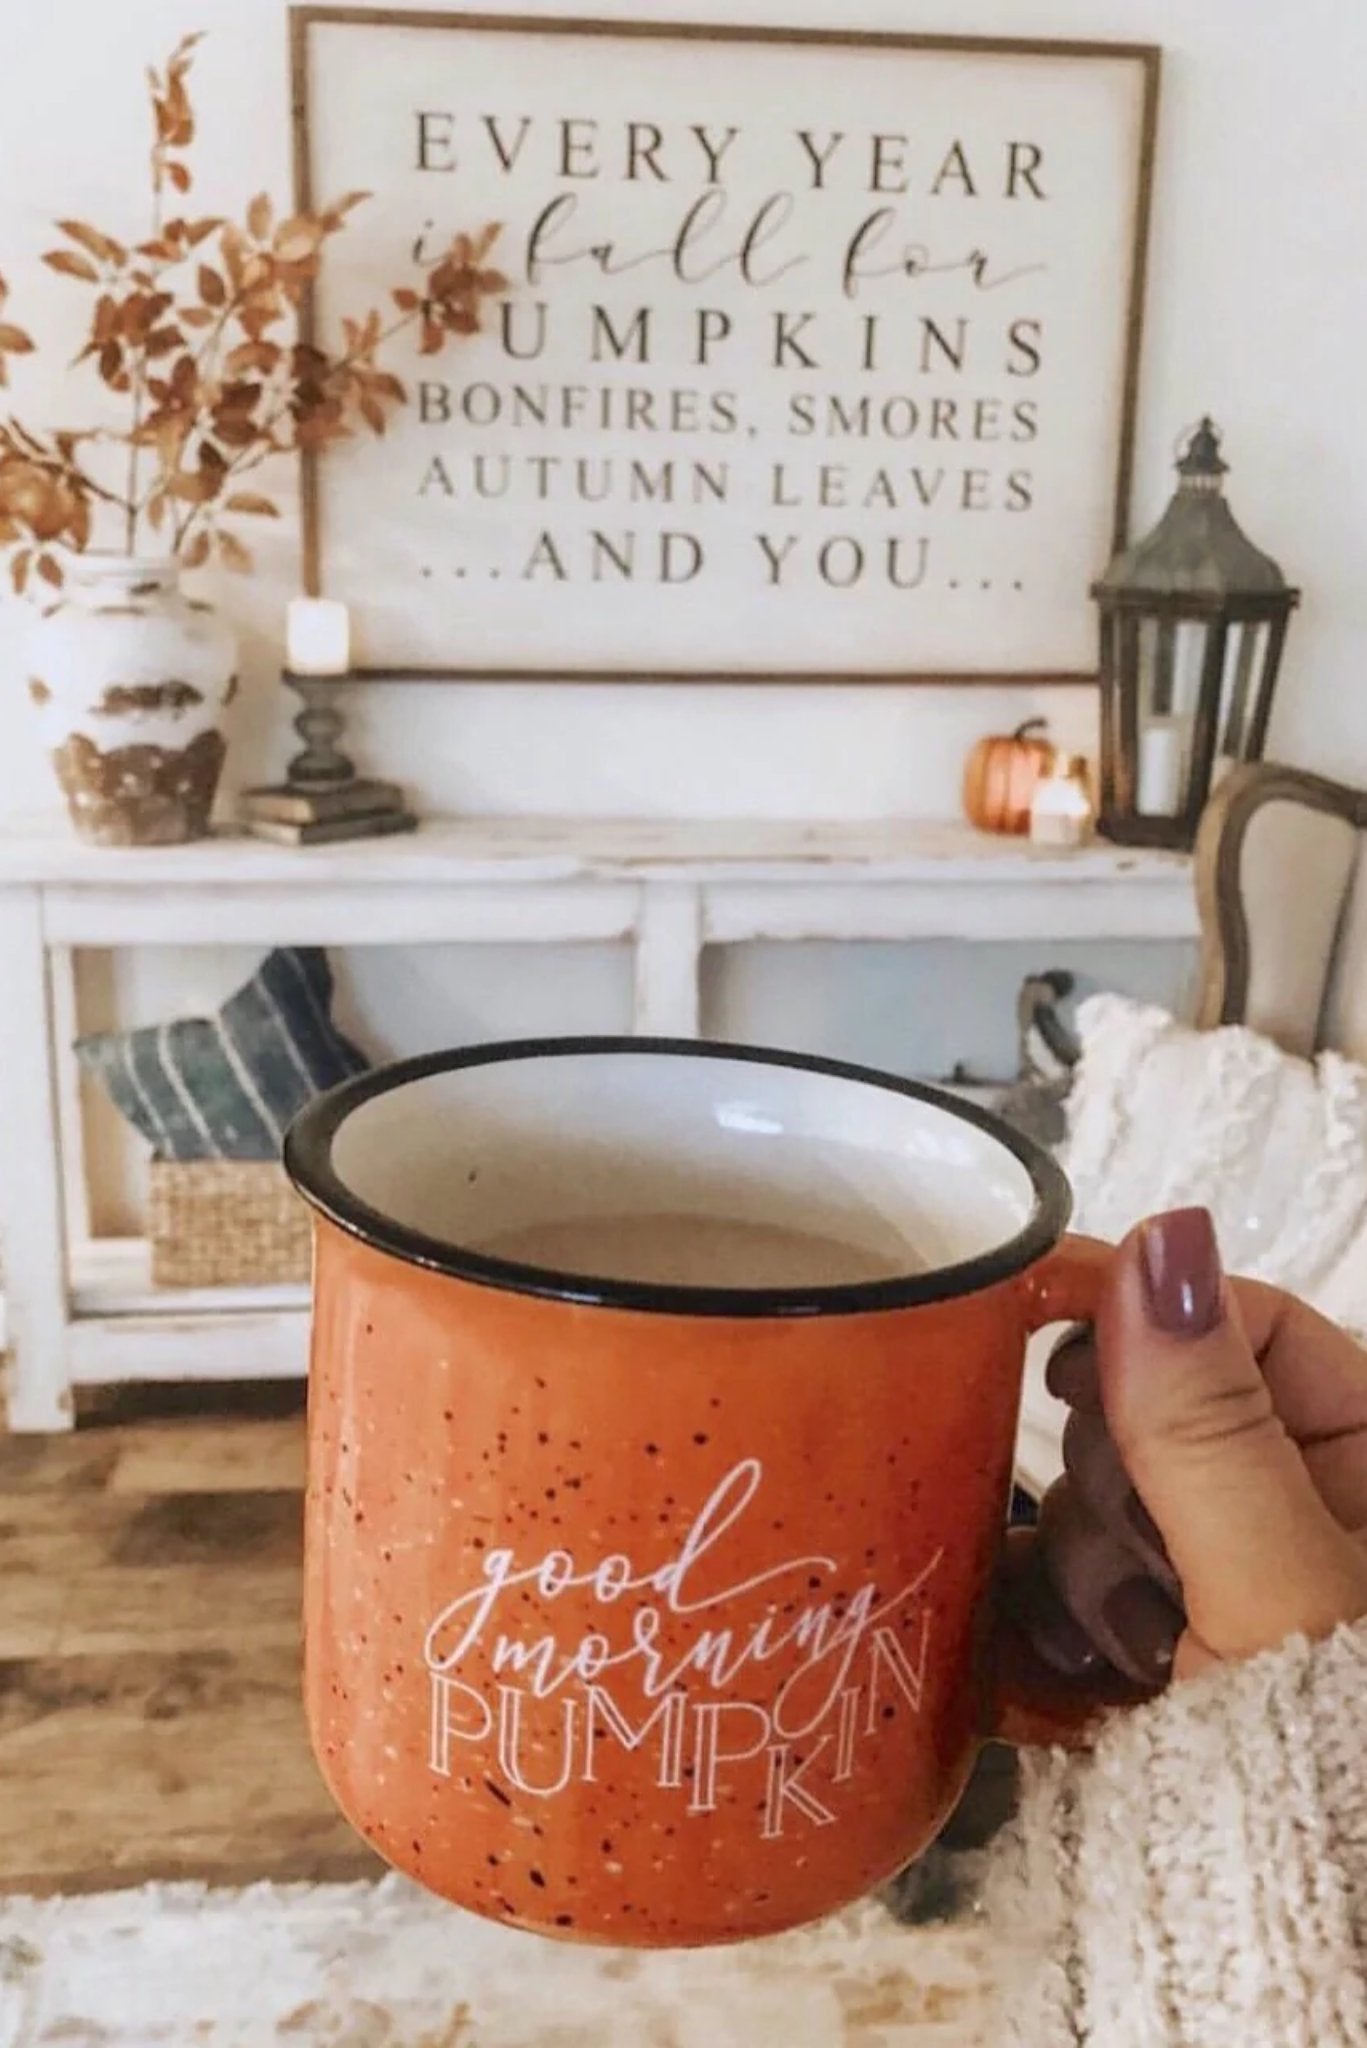 Our Top 5 Favorite Fall Mugs 2022 - Pretty Collected